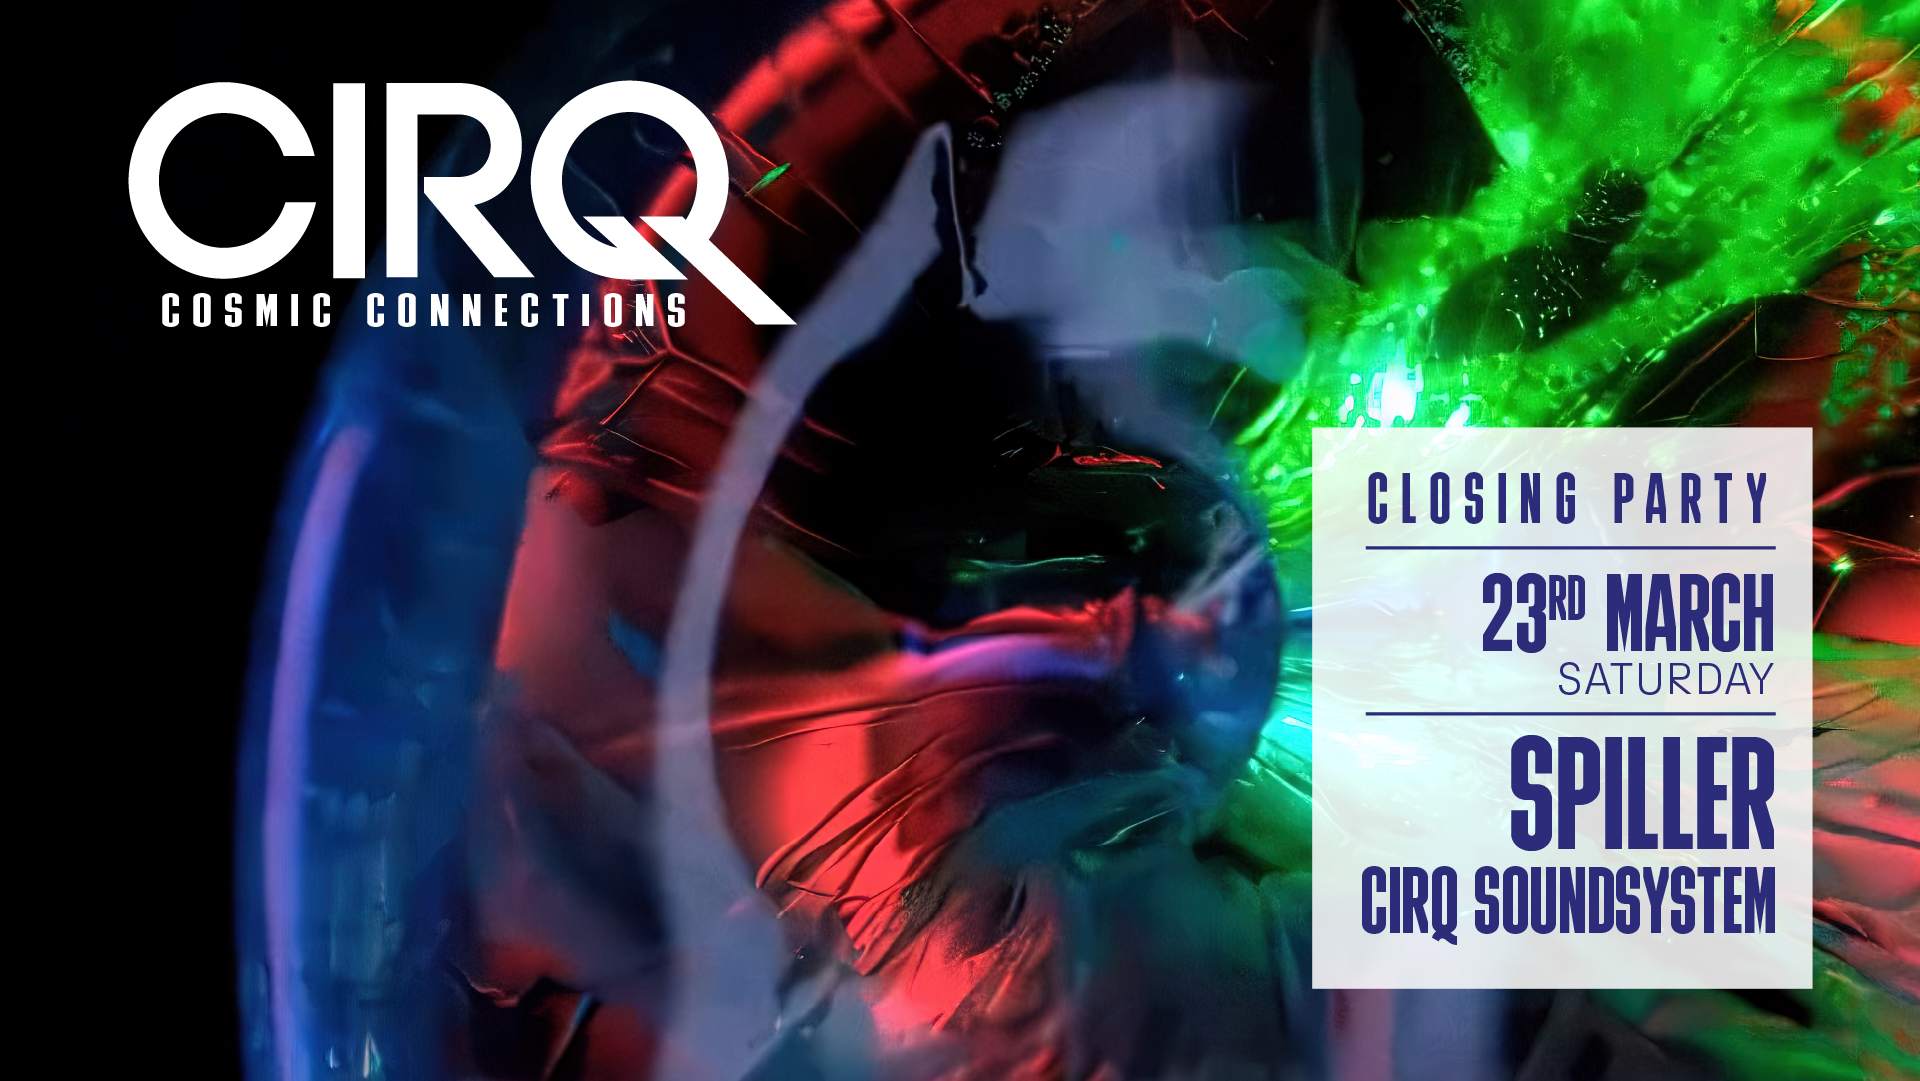 CirQ Closing Party with Spiller (Defected), CirQ Soundsystem - Página frontal